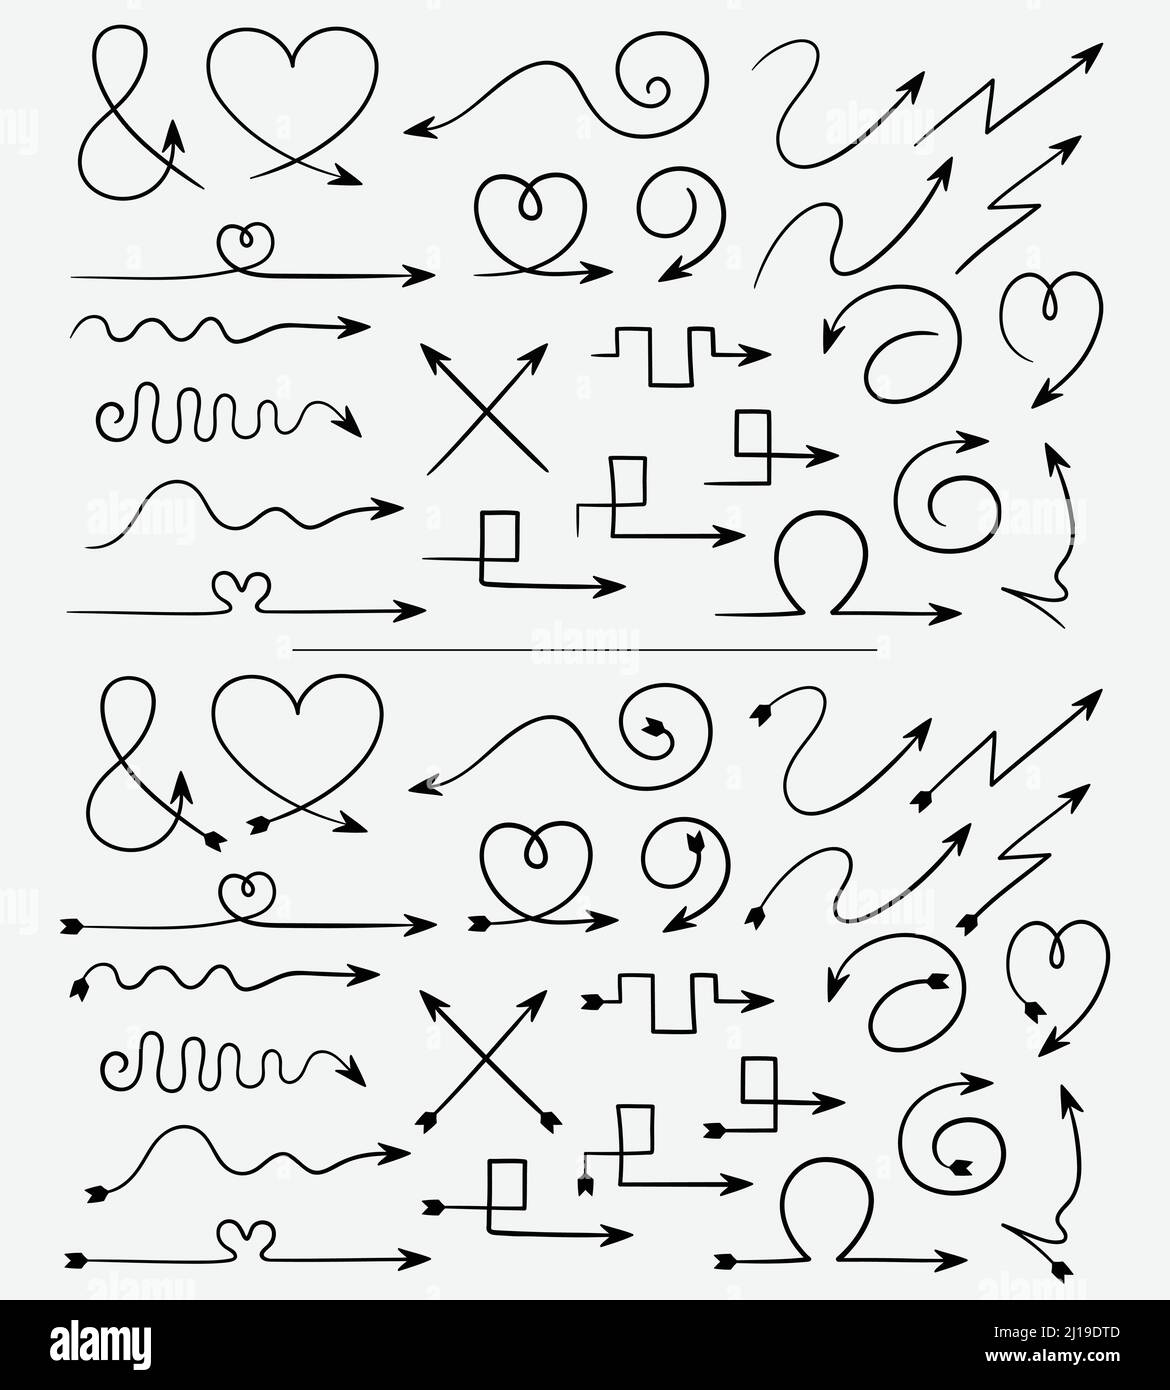 Set of vector, hand drawn, doodle arrows. Collection of swirling, heart and other shaped arrows. Stock Vector